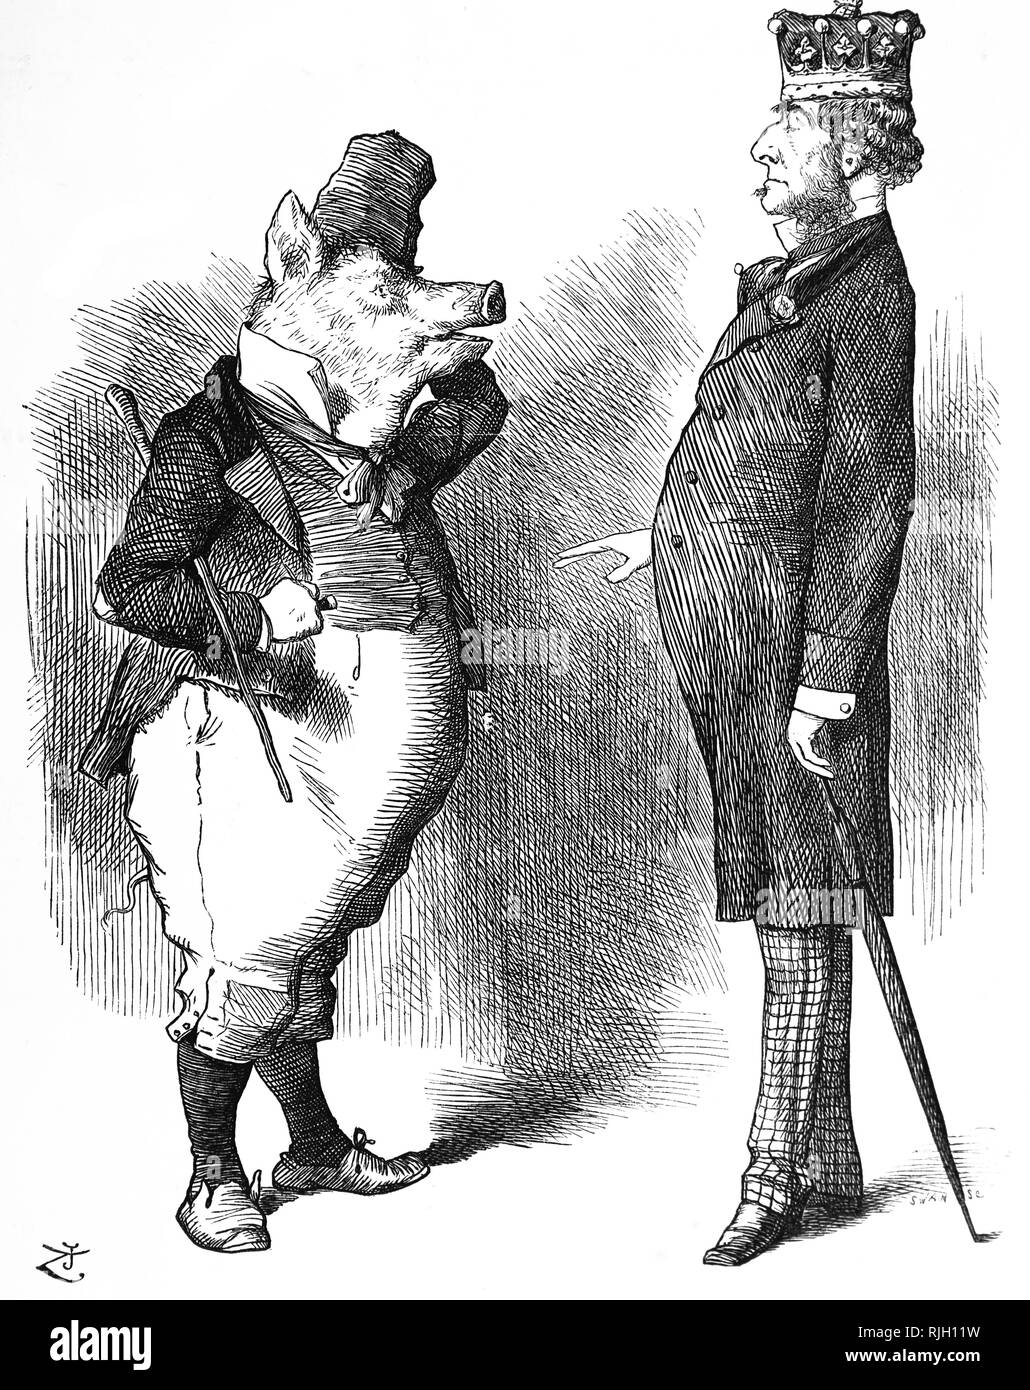 A cartoon commenting on the problems of Ireland. Illustrated by John Tenniel (1820-1914) an English illustrator, graphic humourist, and political cartoonist. Dated 19th century Stock Photo